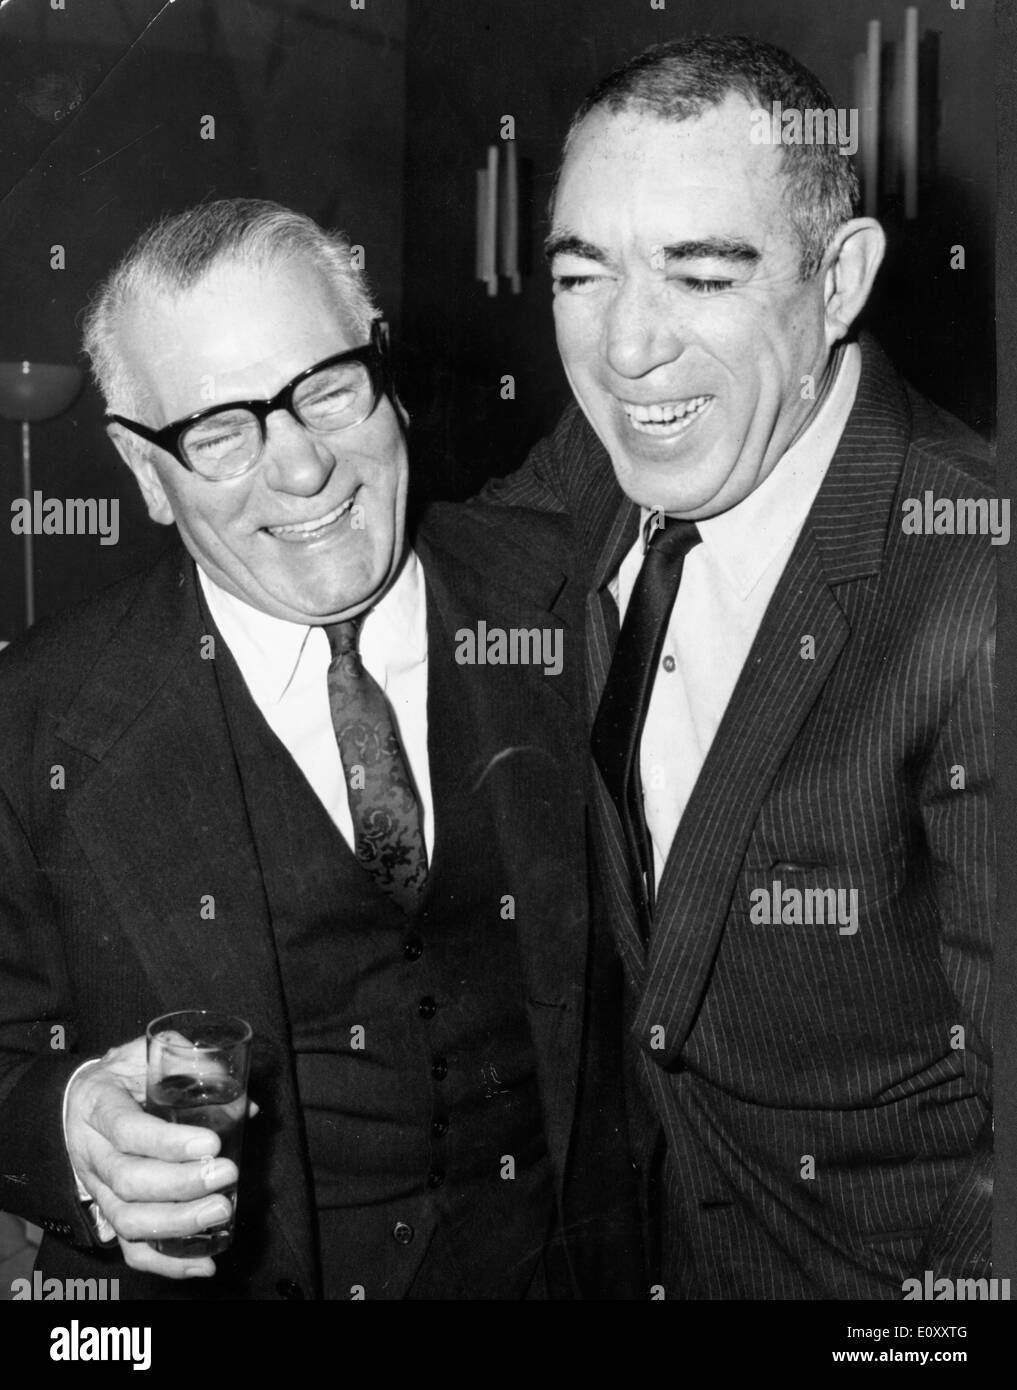 Anthony Quinn and Laurence Olivier at a press conference for a film Stock Photo